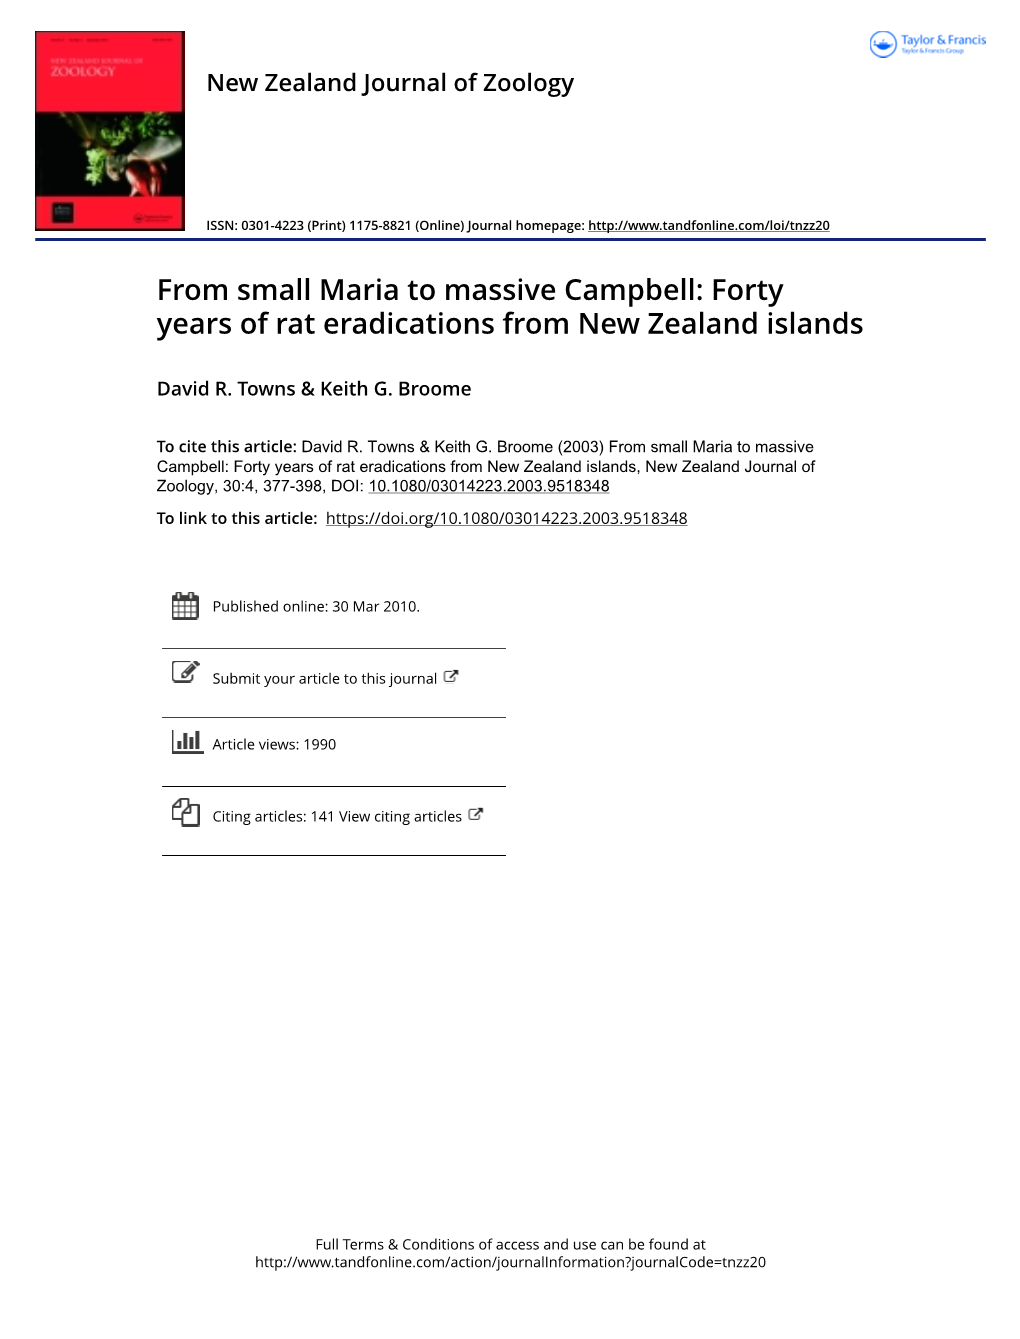 Forty Years of Rat Eradications from New Zealand Islands